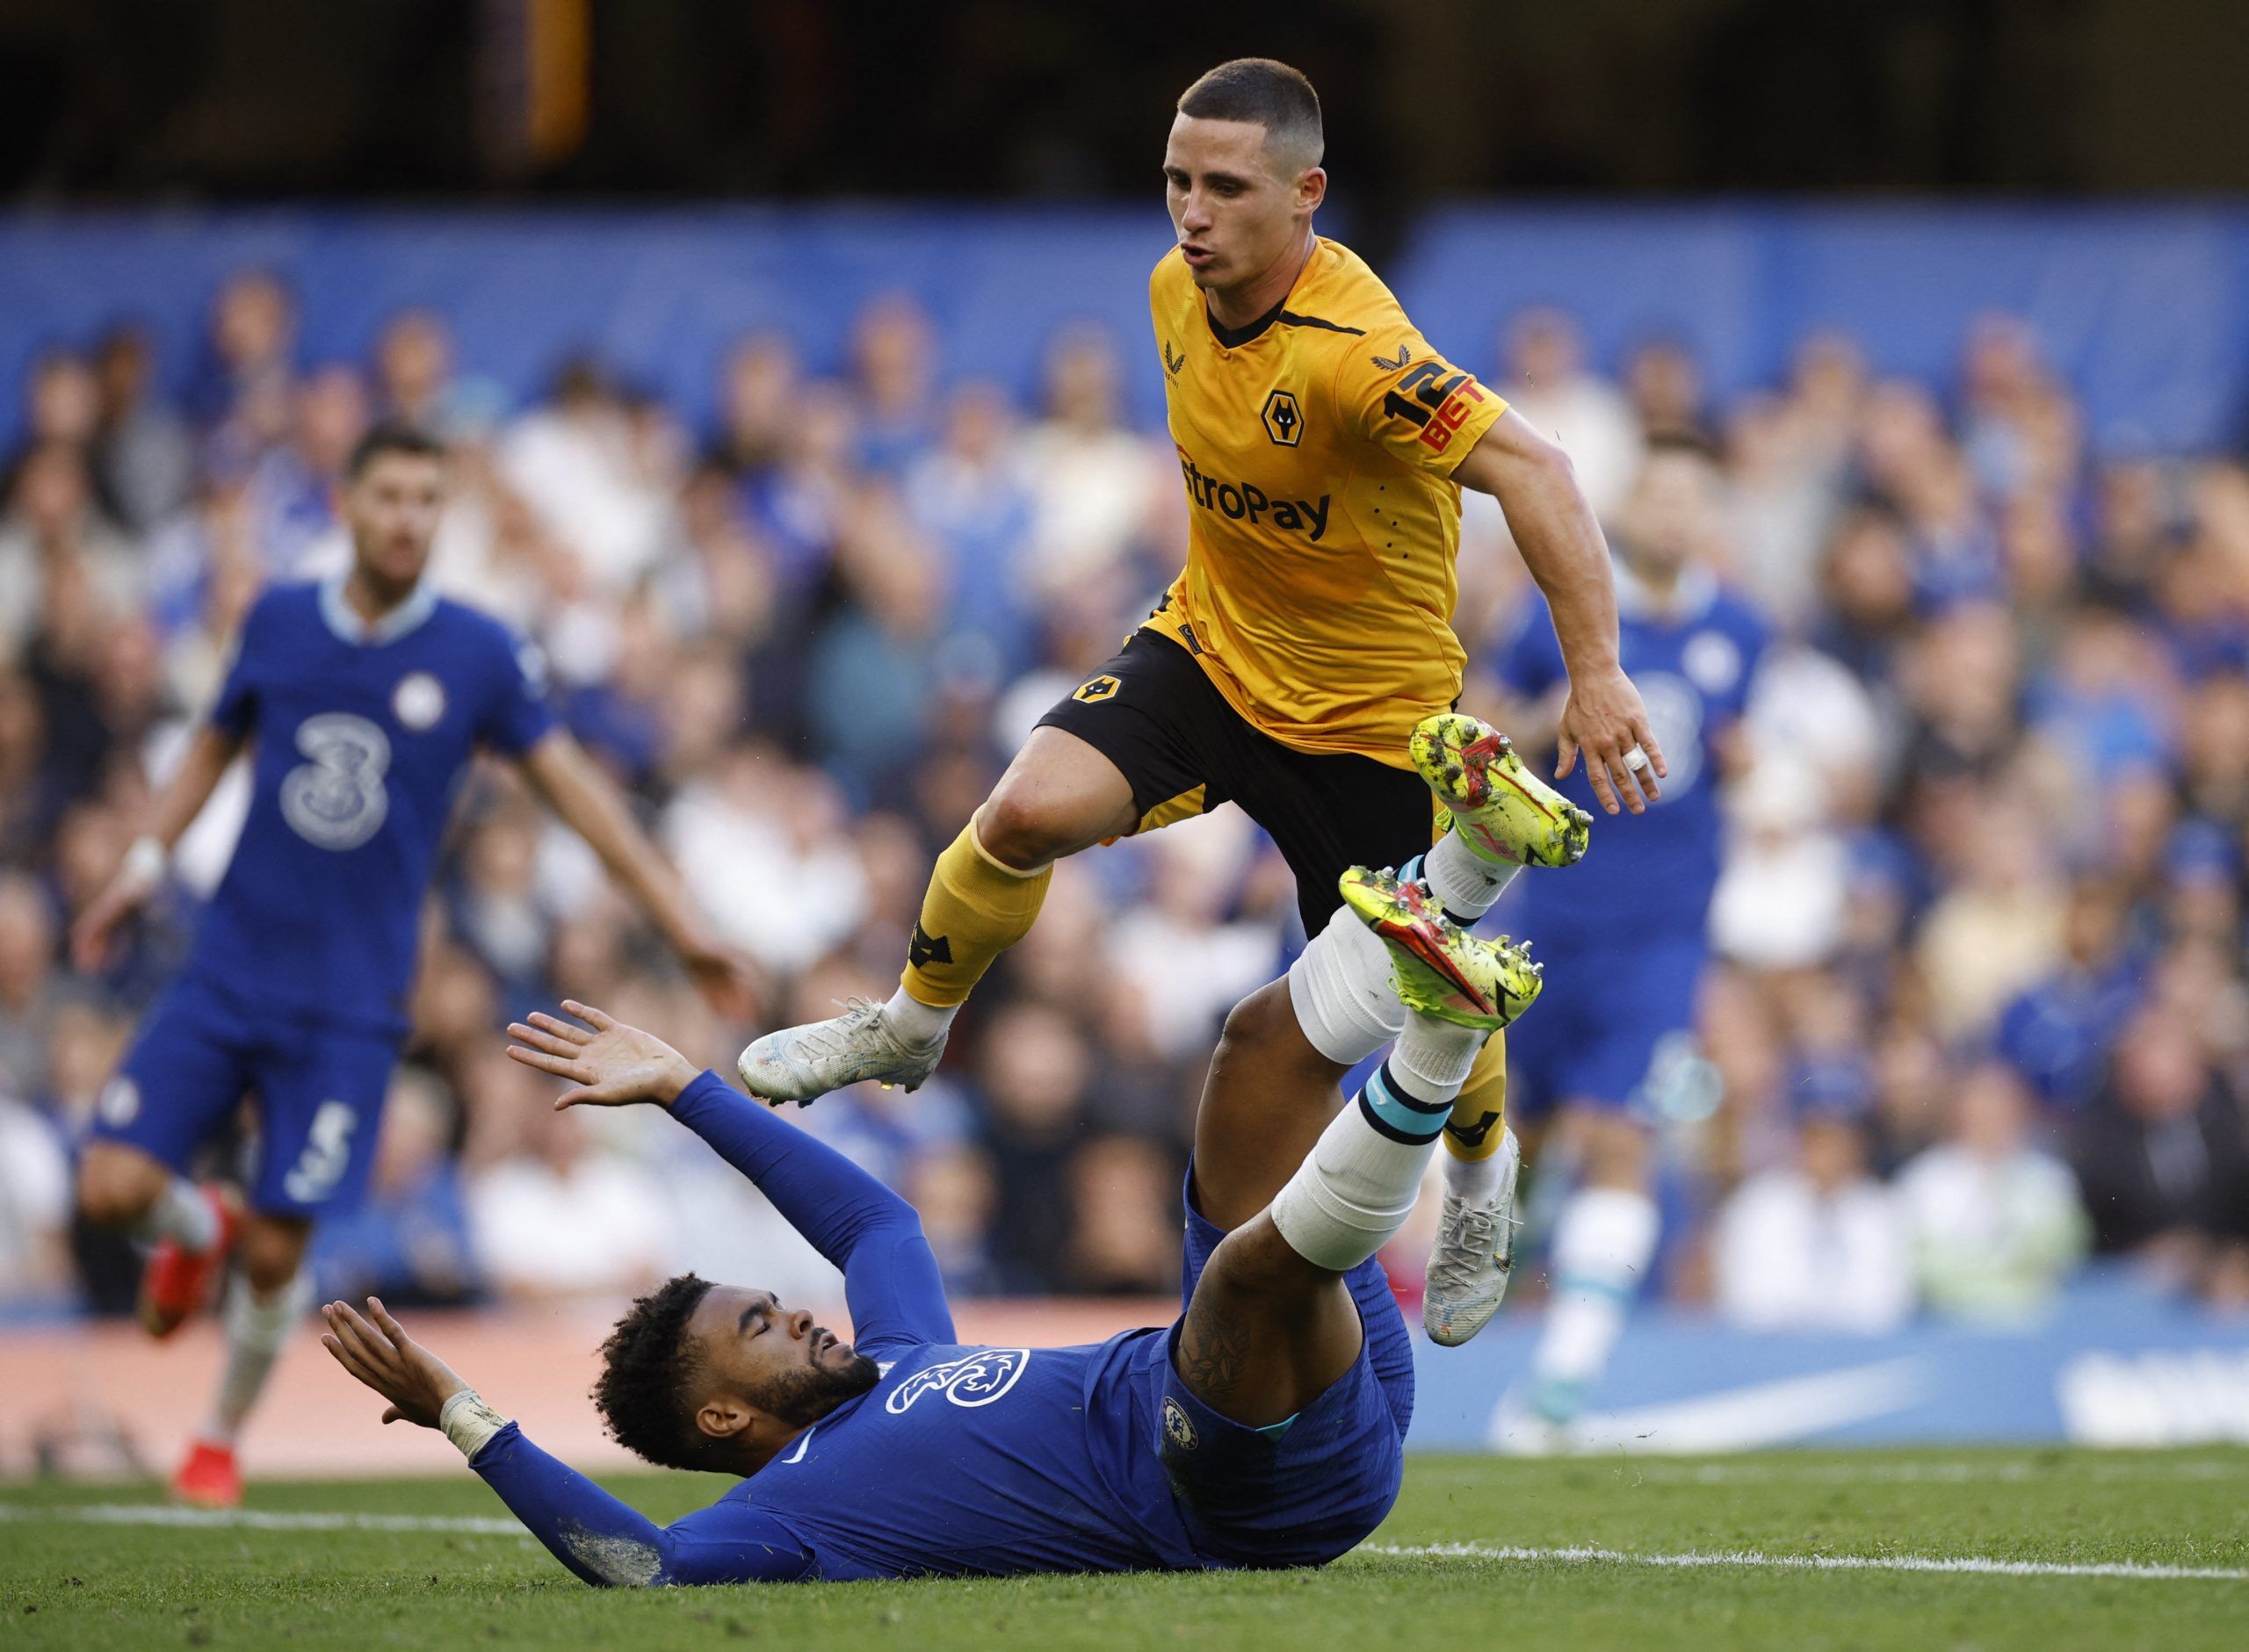 Soccer Football - Premier League - Chelsea v Wolverhampton Wanderers - Stamford Bridge, London, Britain - October 8, 2022 Wolverhampton Wanderers' Daniel Podence in action with Chelsea's Reece James Action Images via Reuters/John Sibley EDITORIAL USE ONLY. No use with unauthorized audio, video, data, fixture lists, club/league logos or 'live' services. Online in-match use limited to 75 images, no video emulation. No use in betting, games or single club /league/player publications.  Please contac